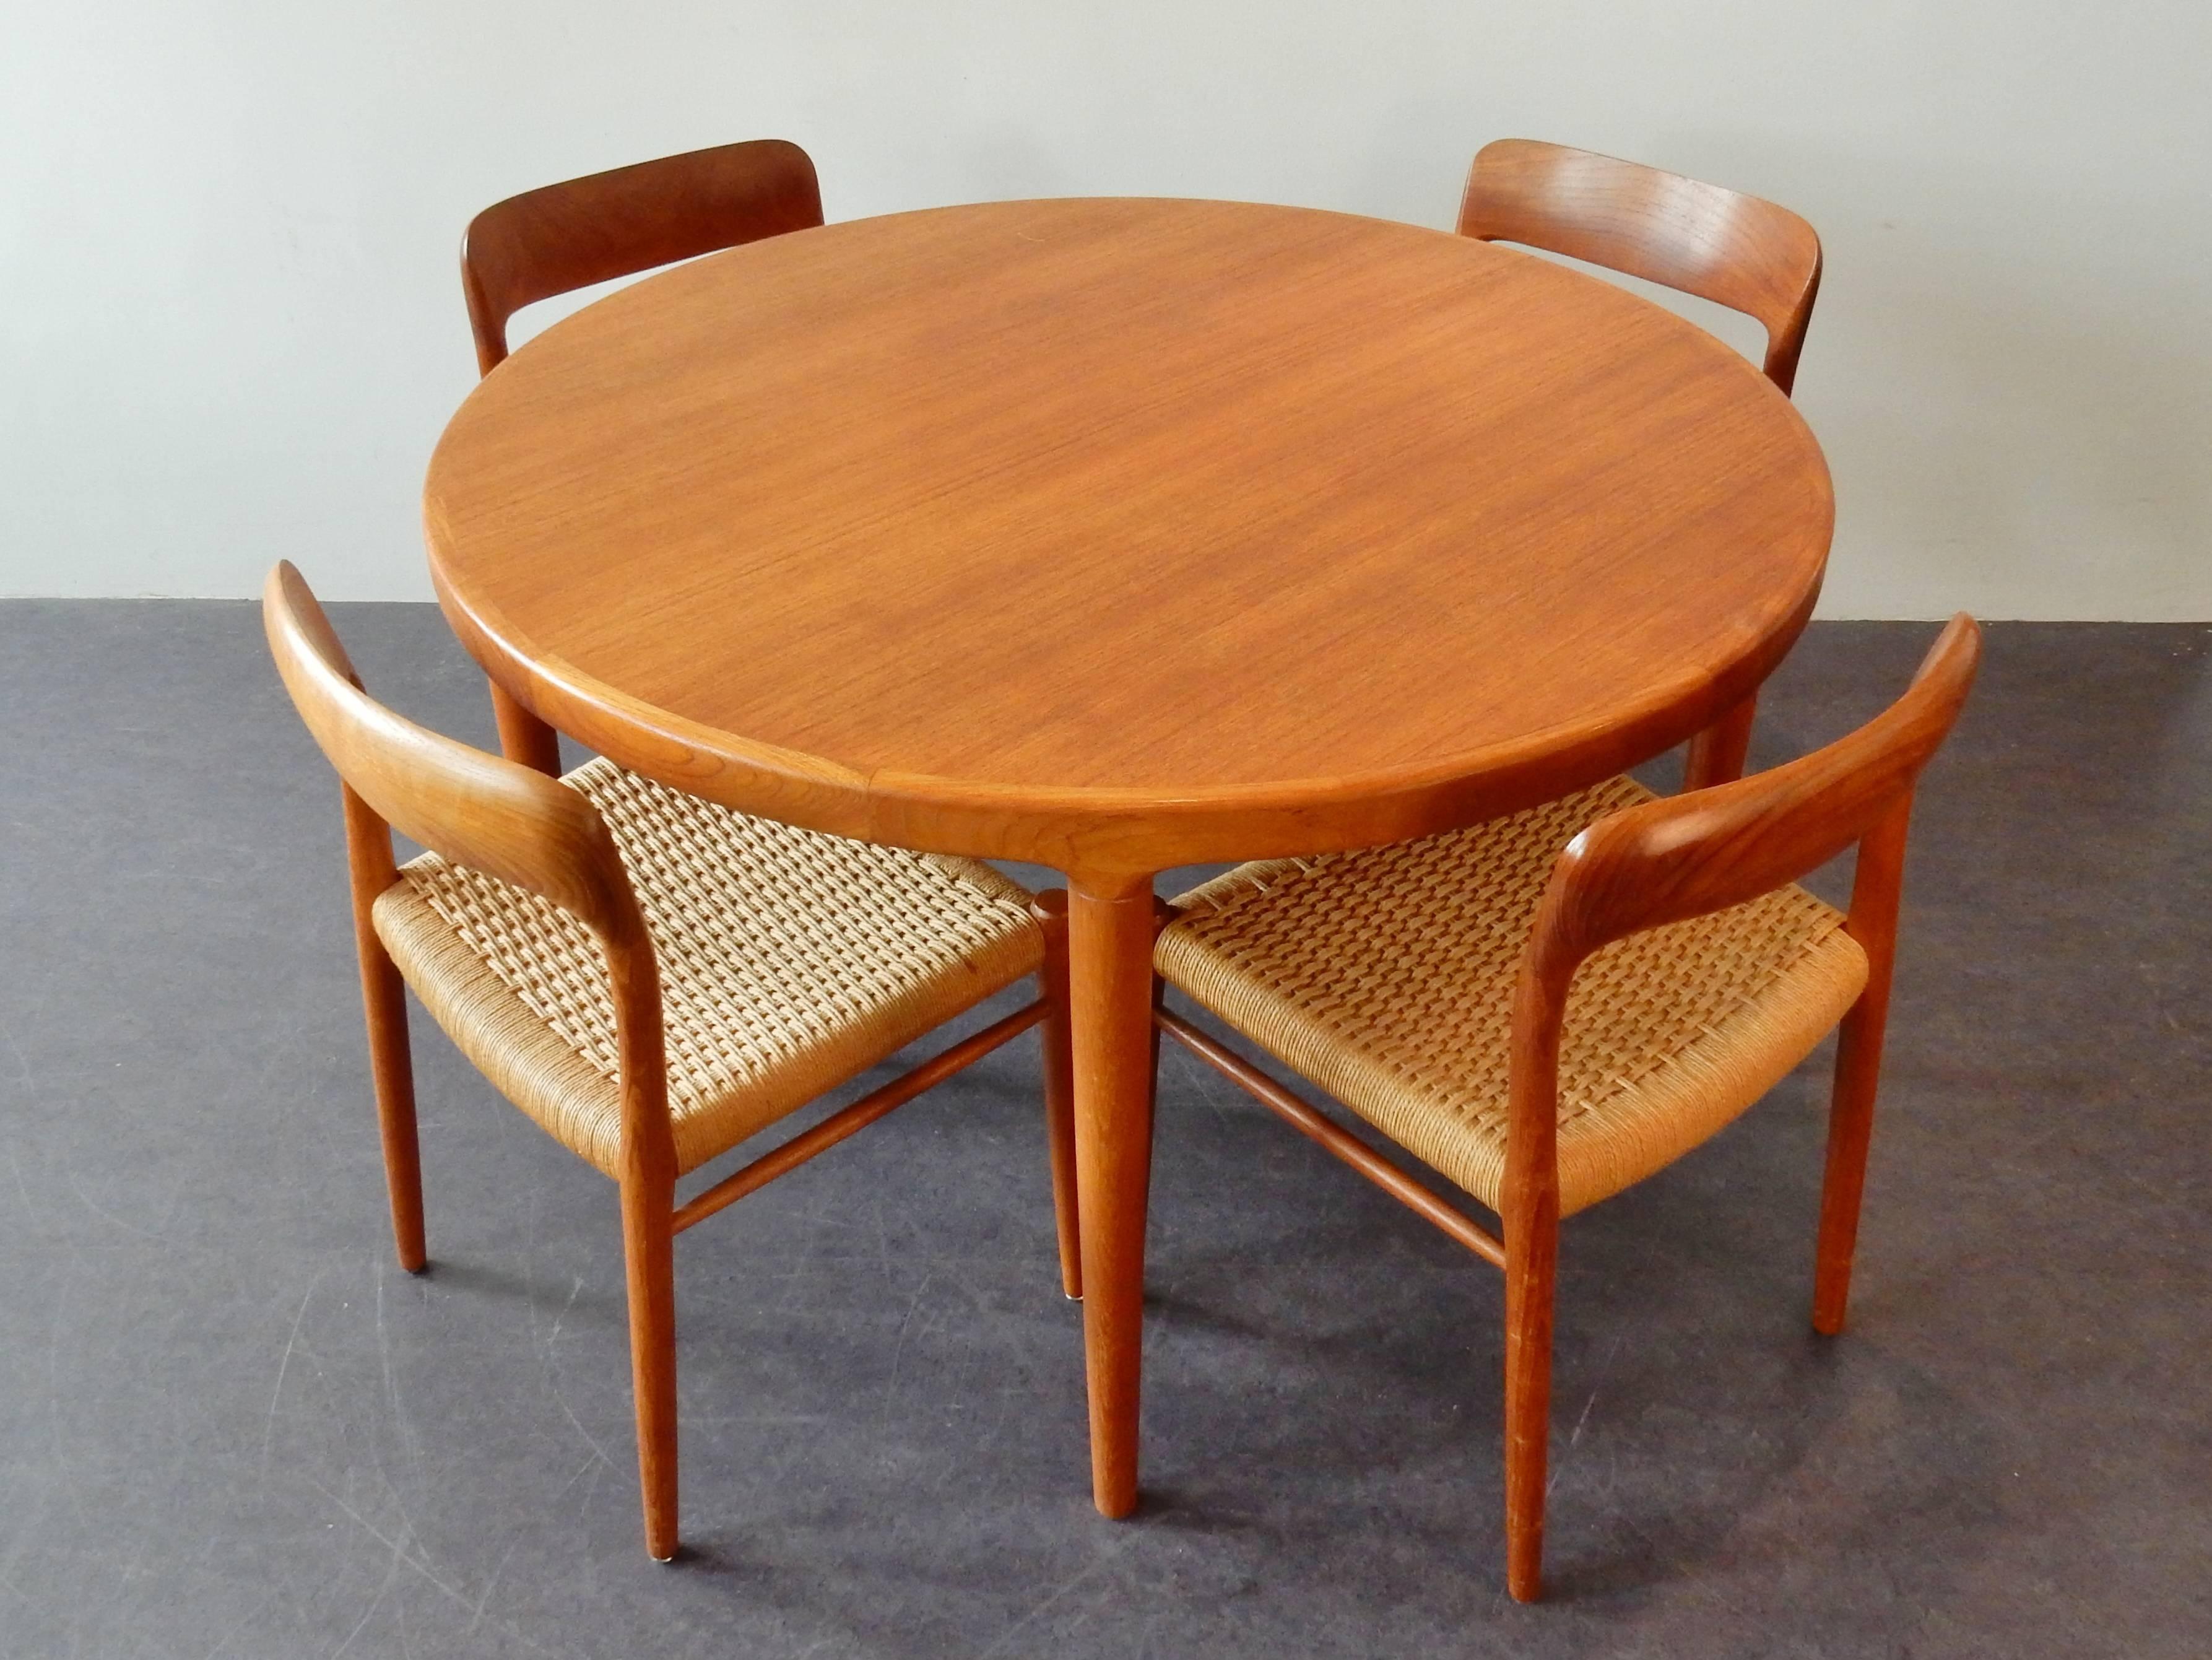 This dining table is in a great condition and a true piece of craftmanship. The solid teak top and legs are in a very good condition. Clearly a tablecloth has always been on top to protect the surface.
This piece is not marked, but was purchased